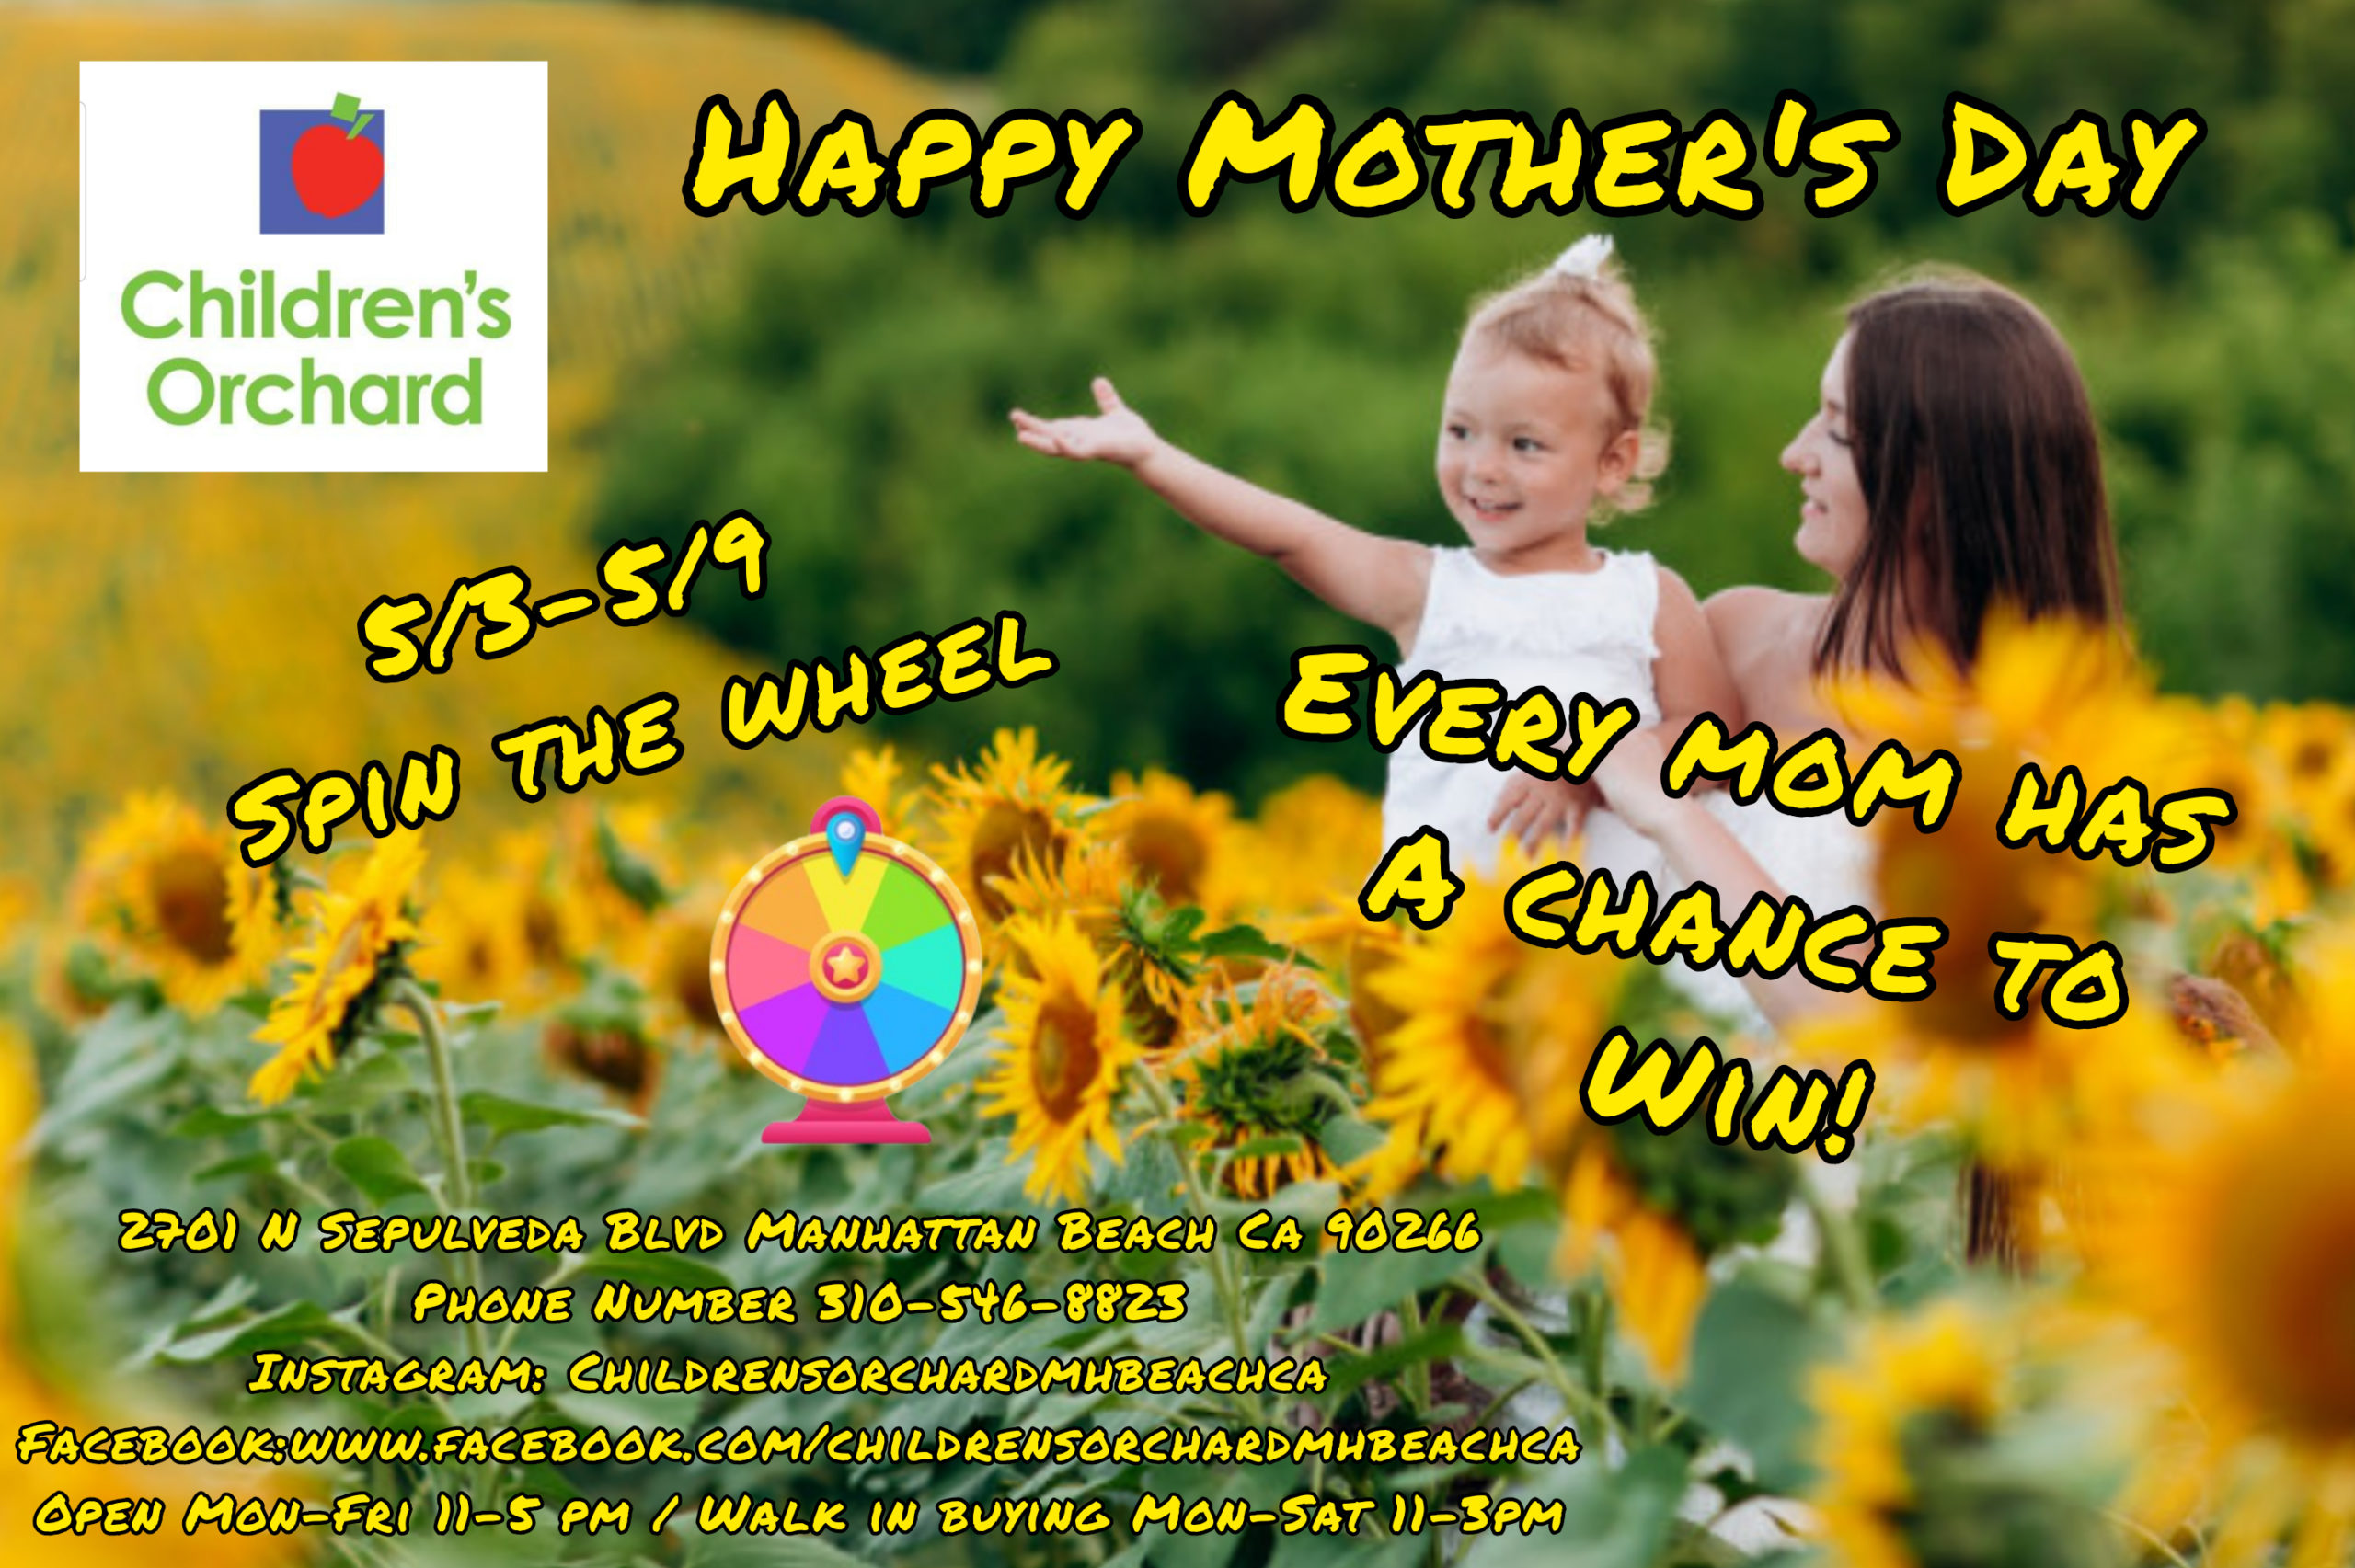 Happy mother's day: spin the wheel May 3-9, every mom has a chance to win.